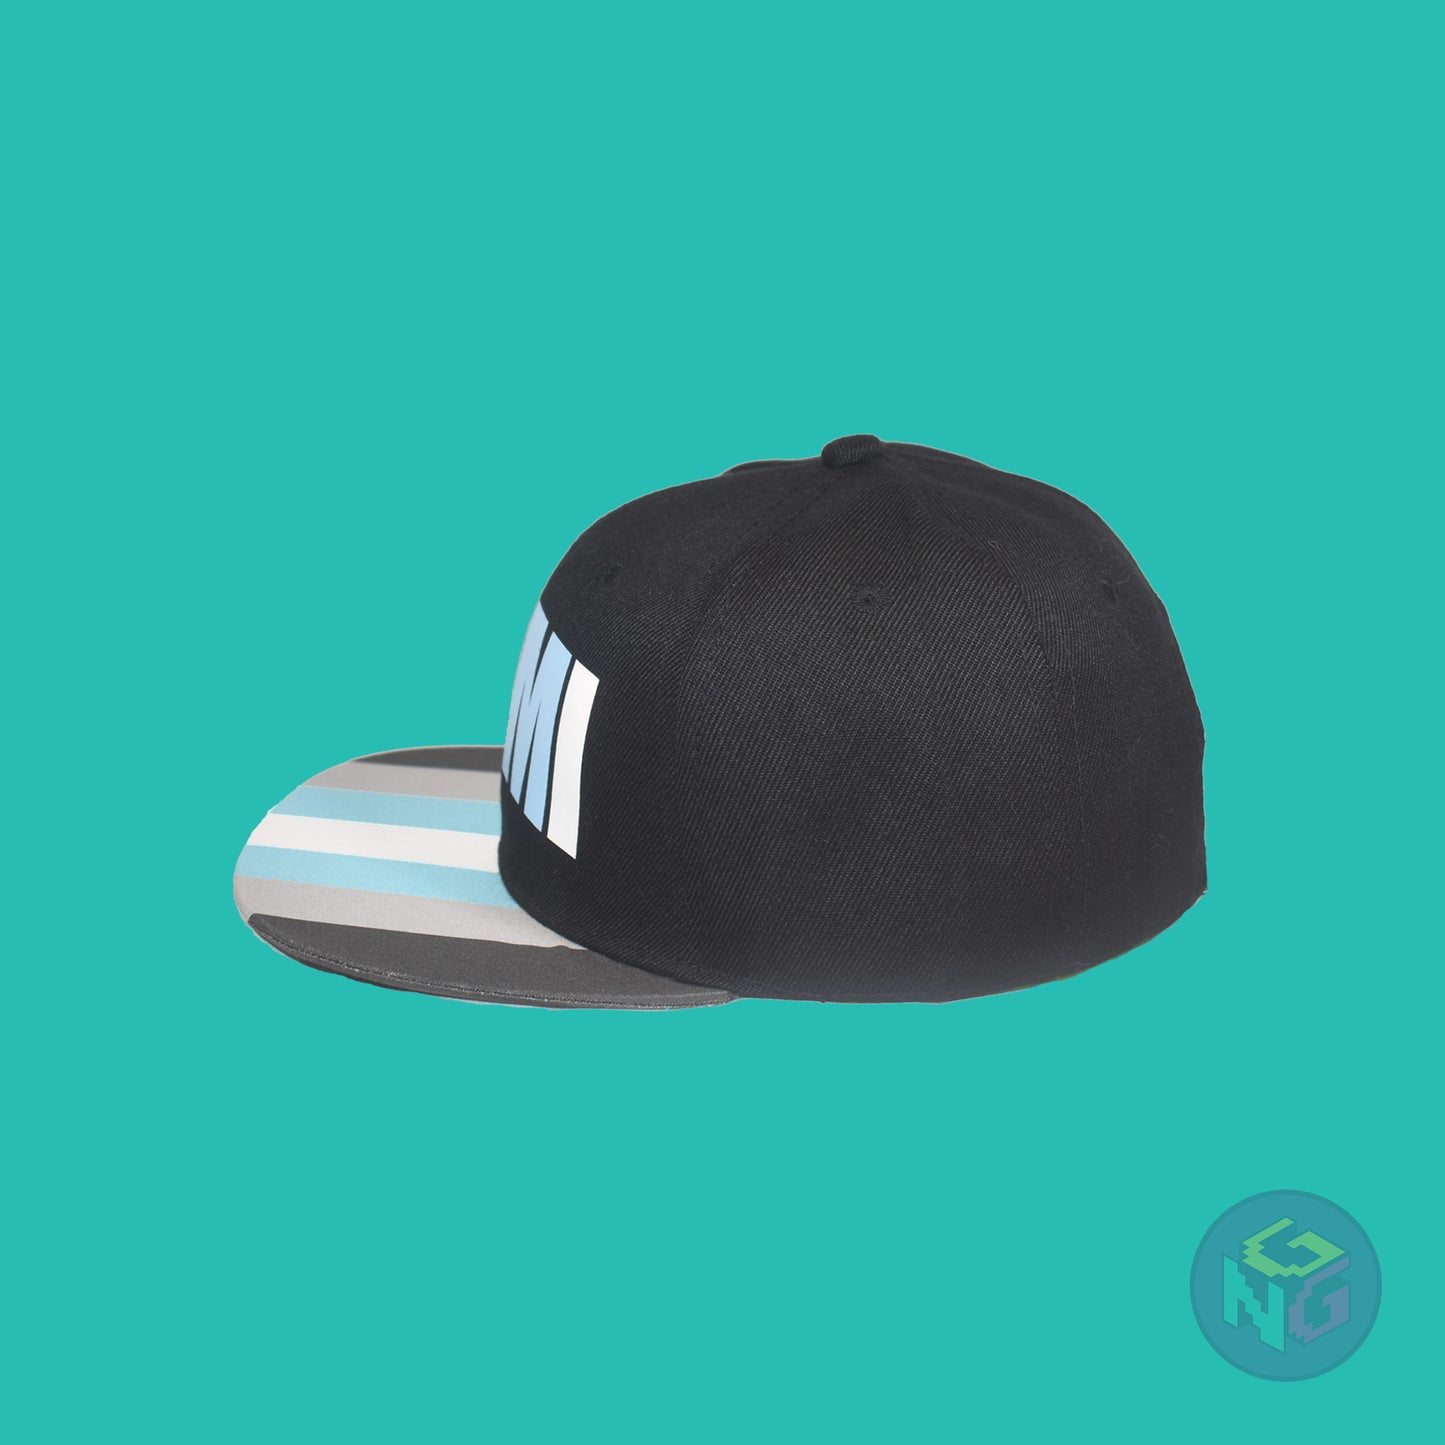 Black flat bill snapback hat. The brim has the demiboy pride flag on both sides and the front of the hat has the word “DEMI” in dark grey, light grey, blue, and white. Left view